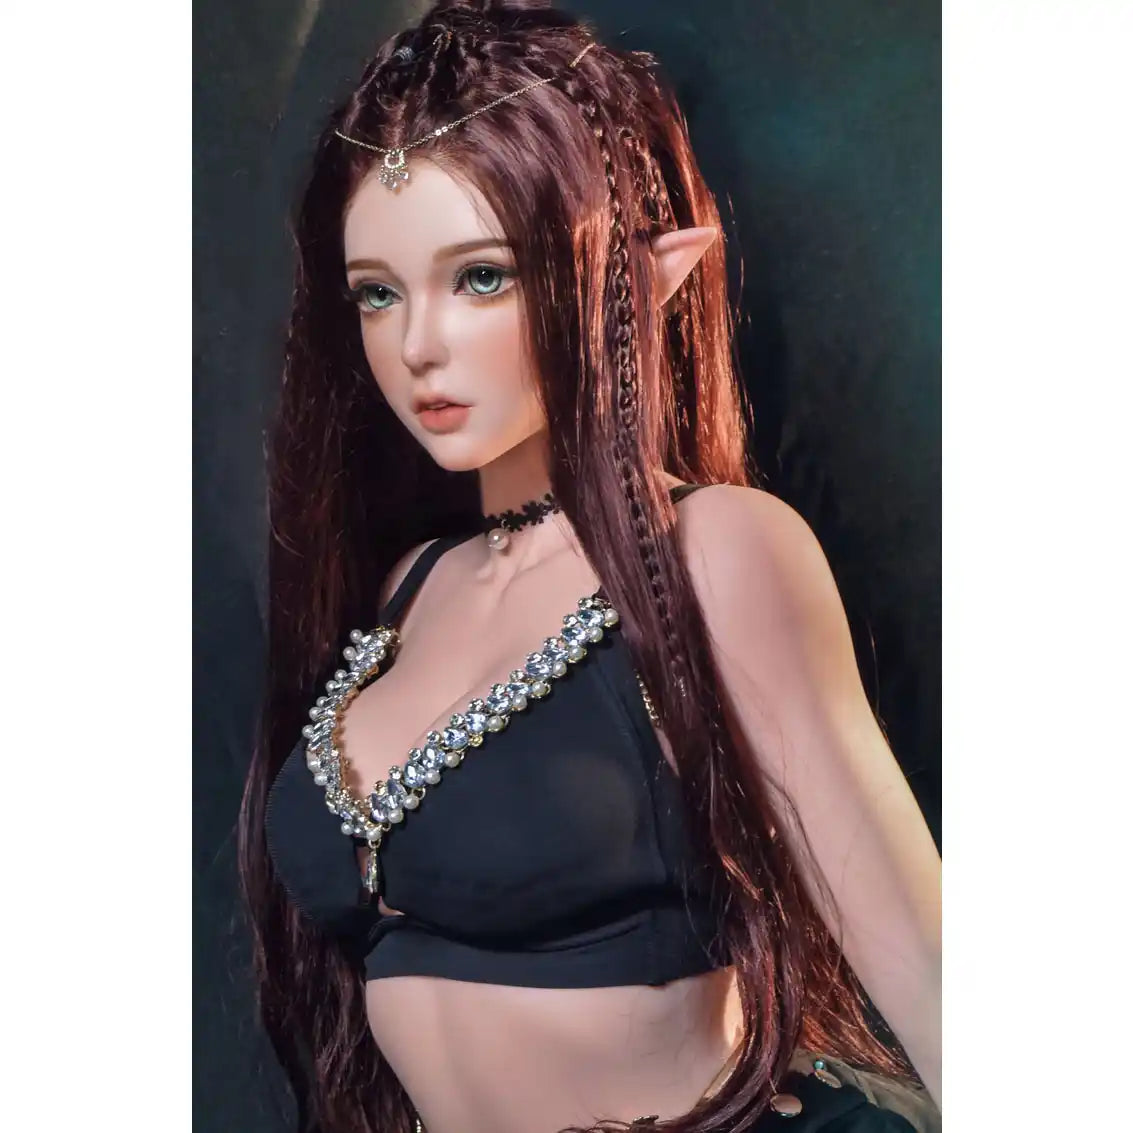 Life like 4ft 11in or 150cm Elf silicone love doll with slim athletic body.